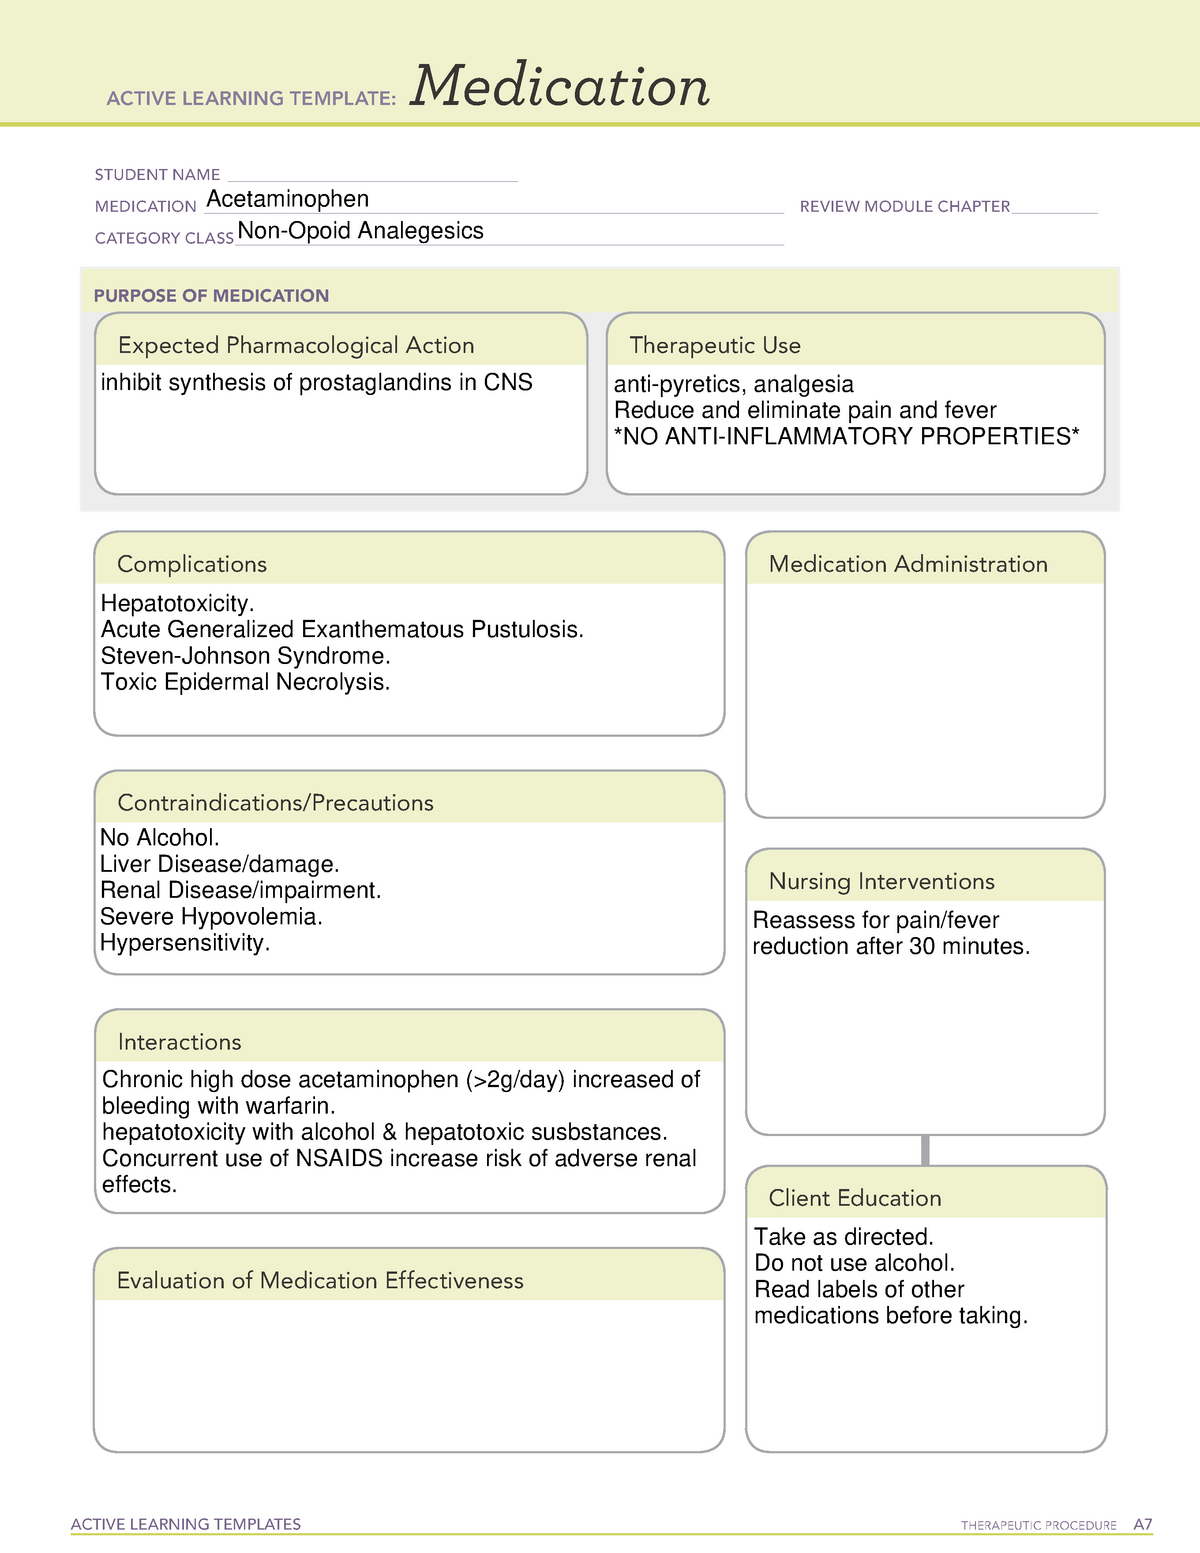 acetaminophen-ati-medication-template-active-learning-templates-therapeutic-procedure-a